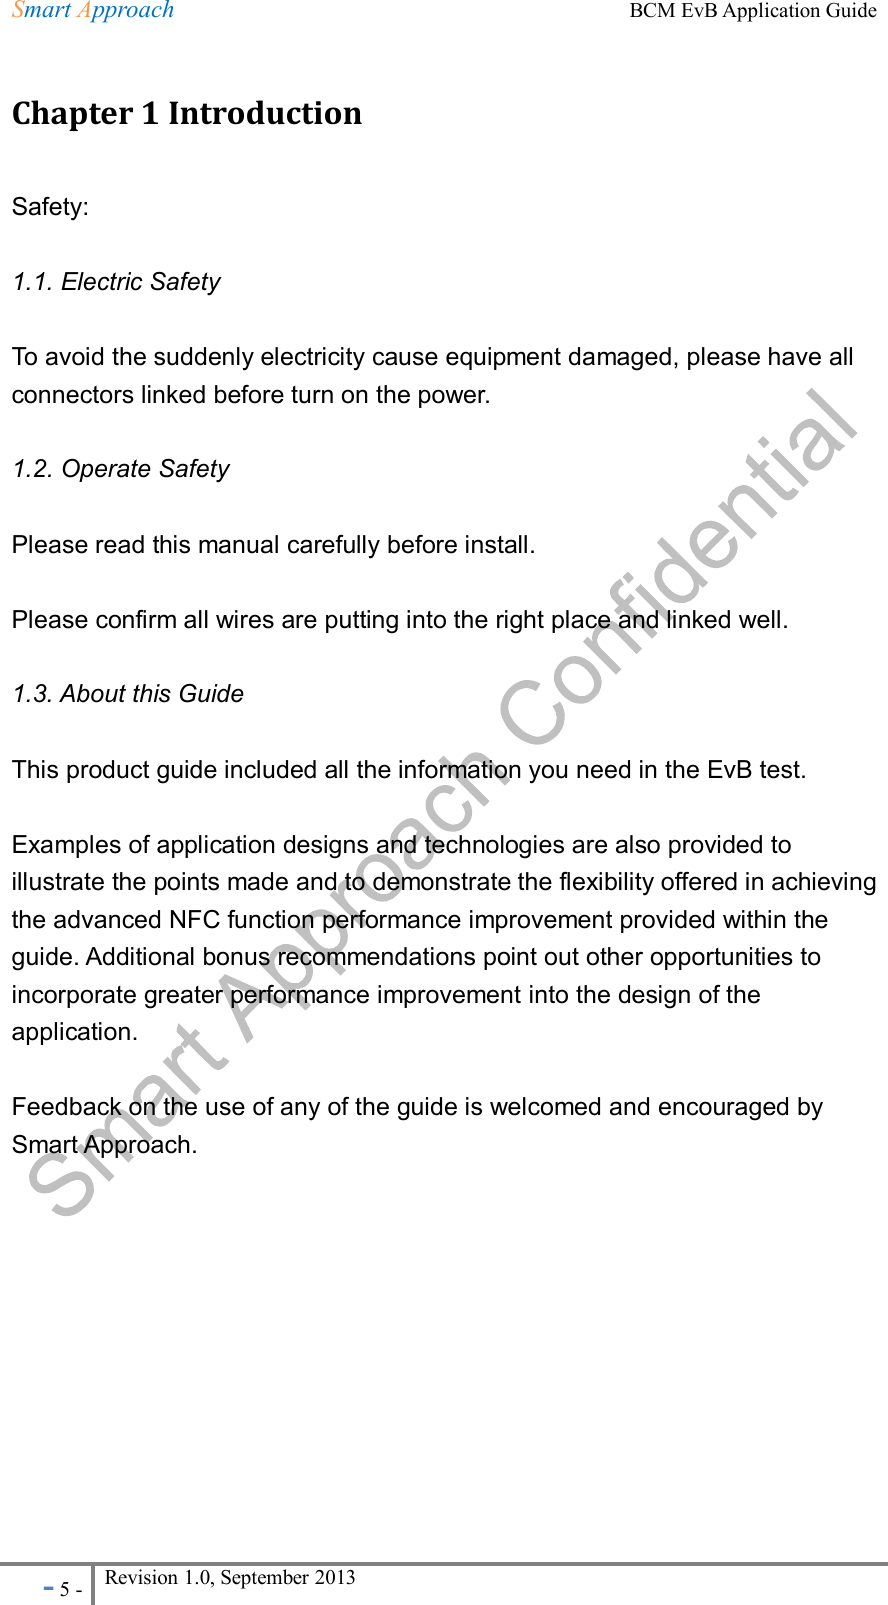 Smart Approach    BCM EvB Application Guide - 5 - Revision 1.0, September 2013                                                             Chapter 1 Introduction Safety:   1.1. Electric Safety To avoid the suddenly electricity cause equipment damaged, please have all connectors linked before turn on the power.   1.2. Operate Safety Please read this manual carefully before install.   Please confirm all wires are putting into the right place and linked well.   1.3. About this Guide This product guide included all the information you need in the EvB test.     Examples of application designs and technologies are also provided to illustrate the points made and to demonstrate the flexibility offered in achieving the advanced NFC function performance improvement provided within the guide. Additional bonus recommendations point out other opportunities to incorporate greater performance improvement into the design of the application.  Feedback on the use of any of the guide is welcomed and encouraged by Smart Approach.      